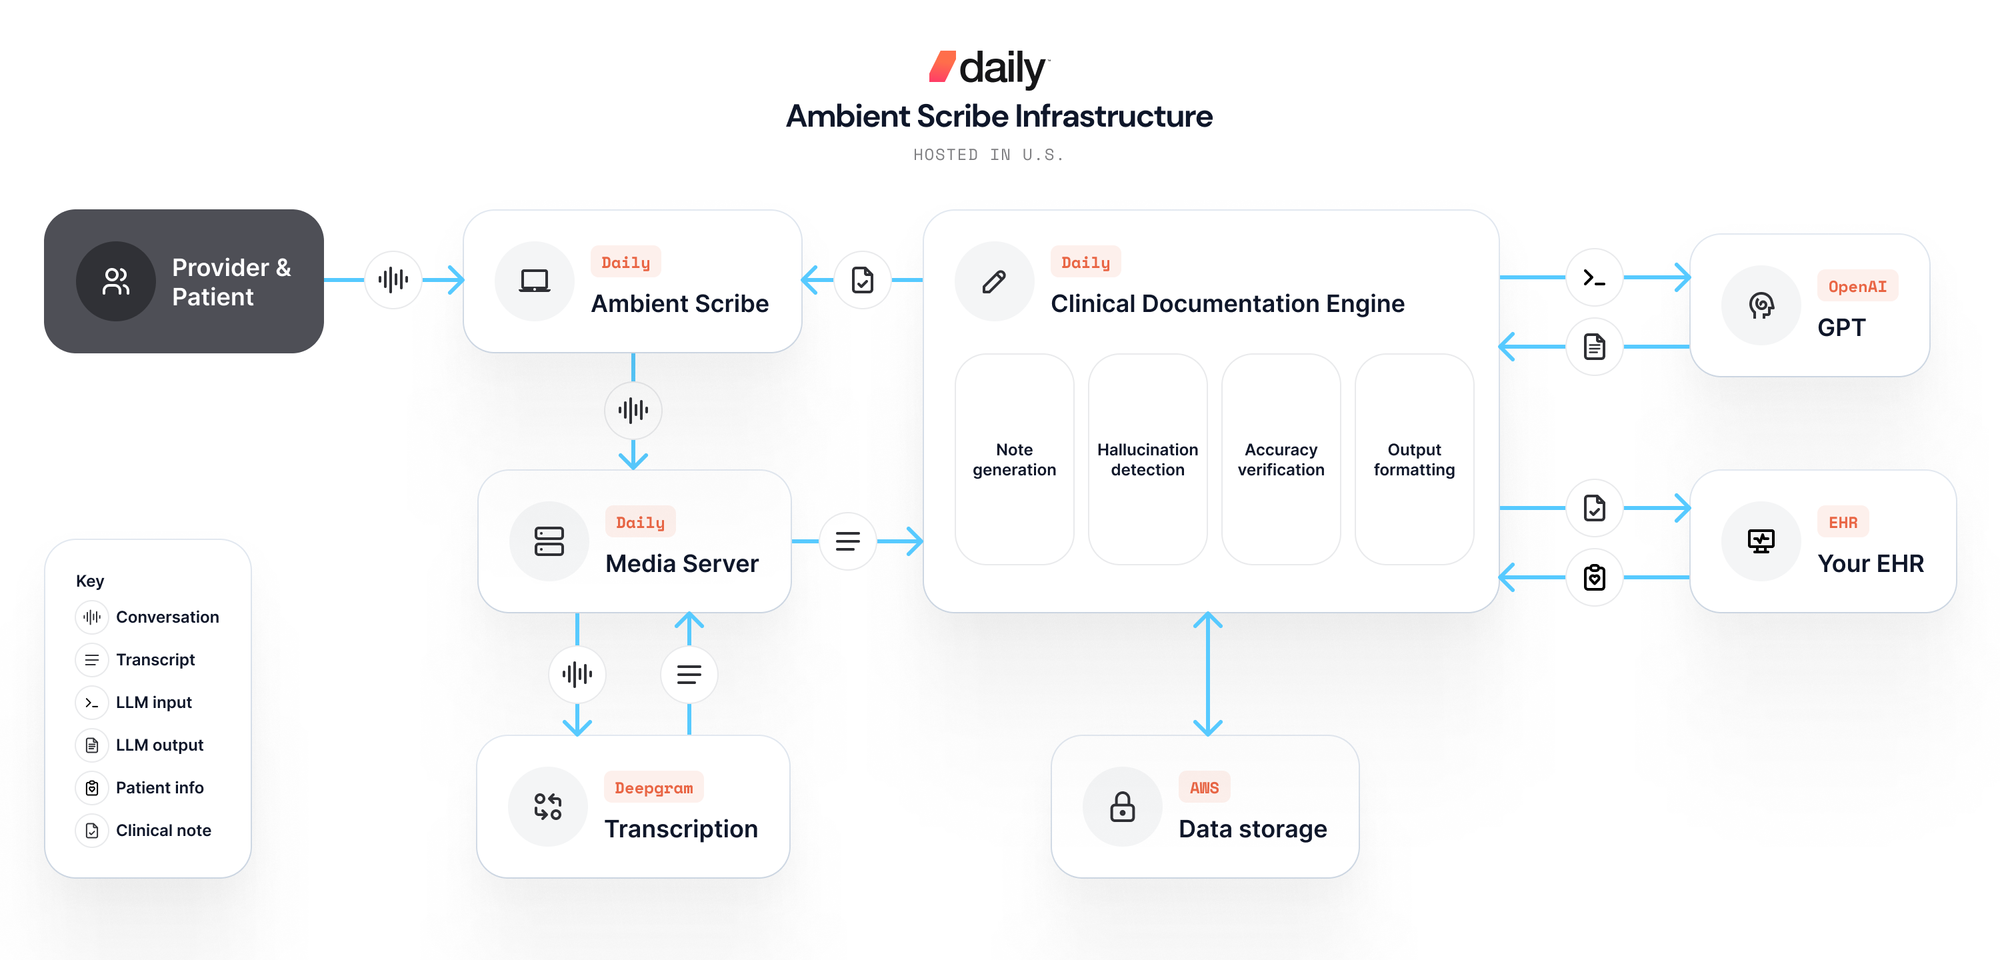 Daily Ambient Scribe: Engineered for Security and Privacy in Healthcare